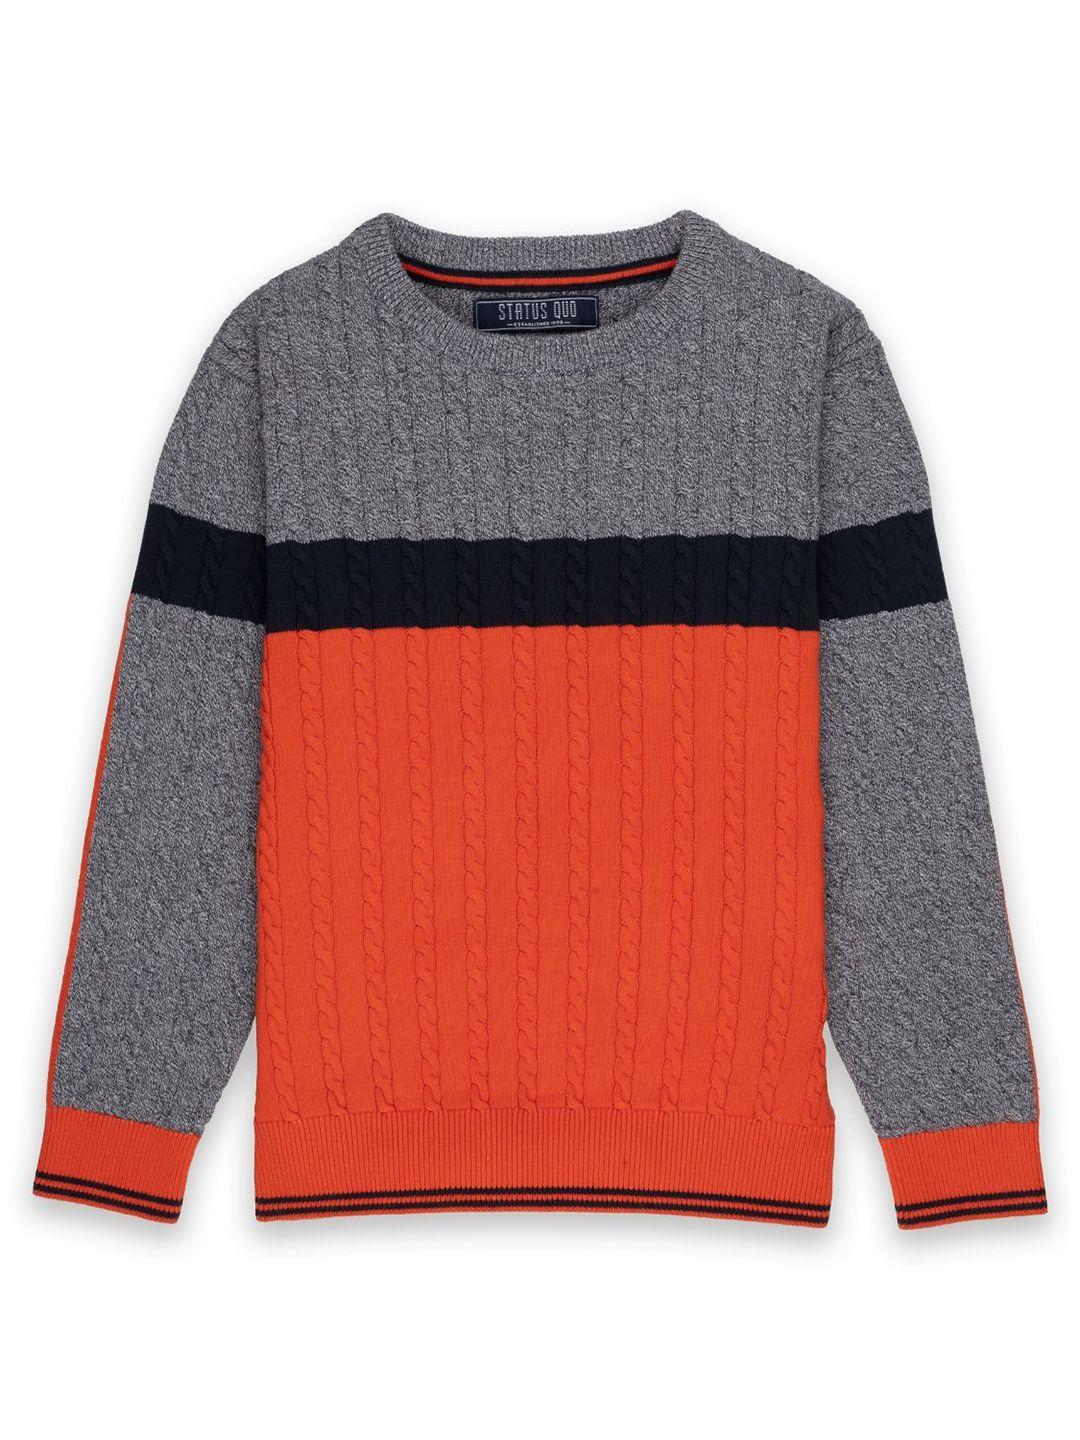 status quo boys navy blue & orange cable knit colourblocked pullover